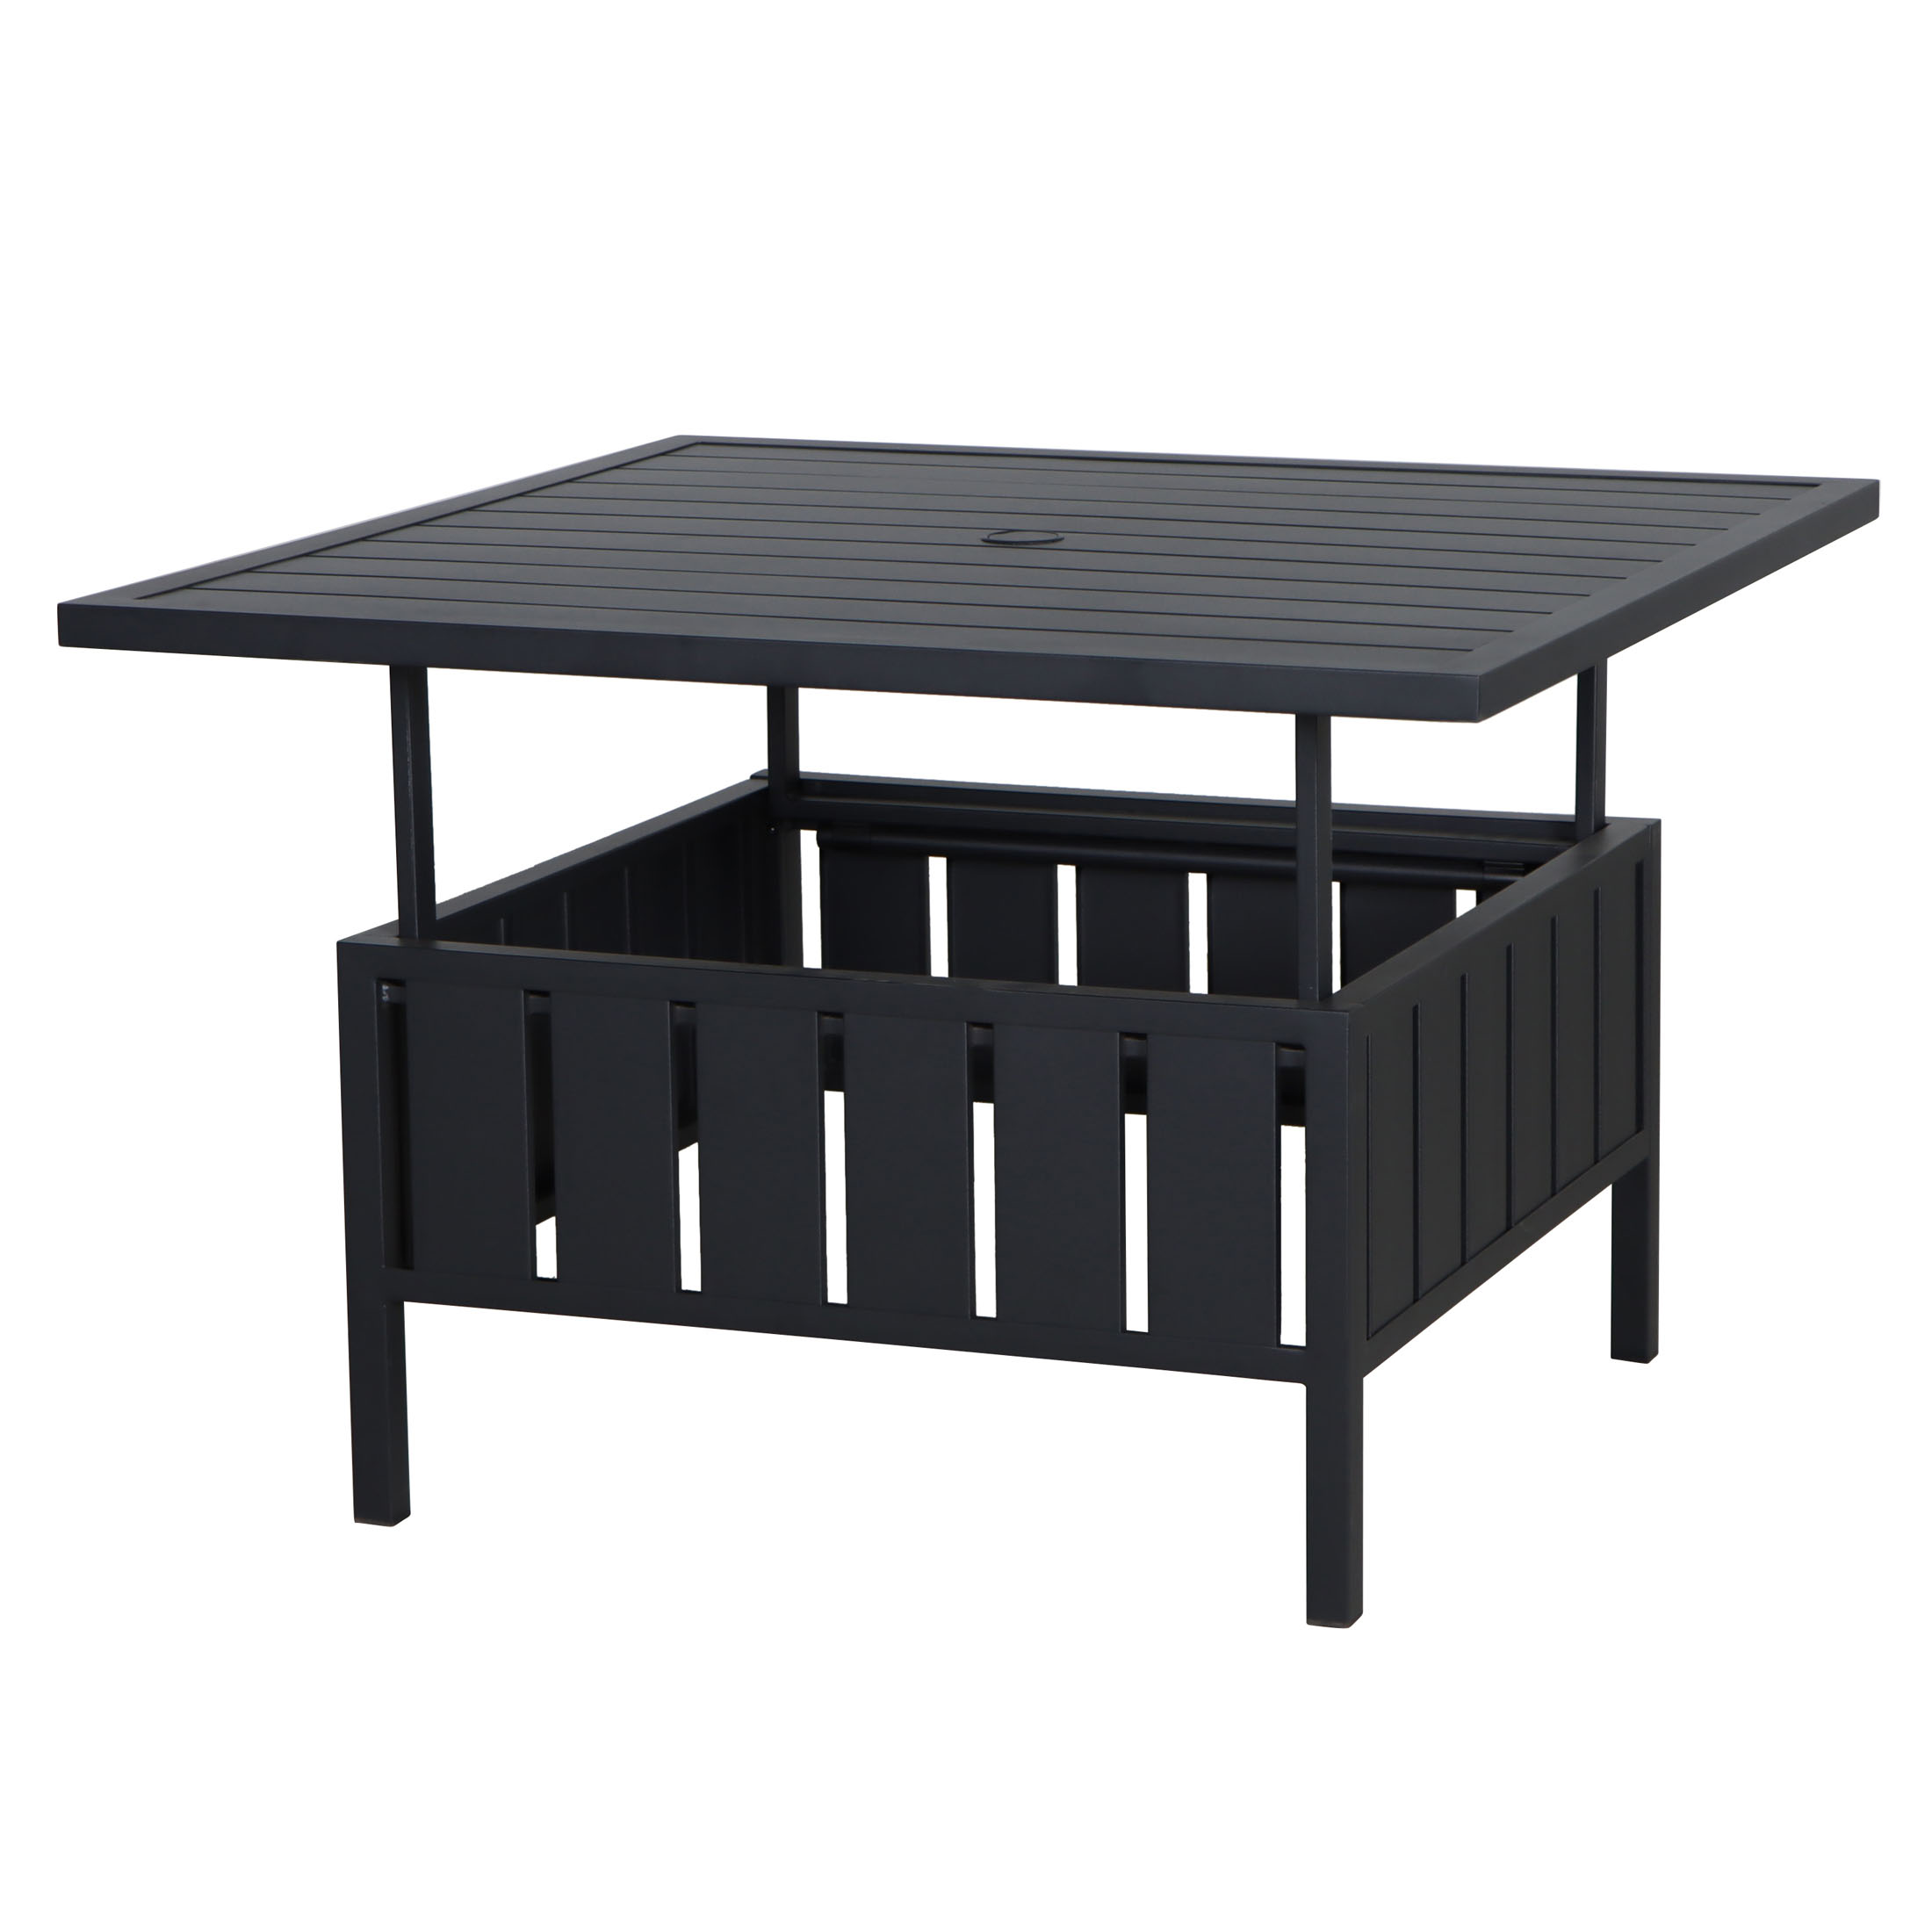 Mainstays Asher Springs Adjustable Rectangular Steel Outdoor Table - image 2 of 9